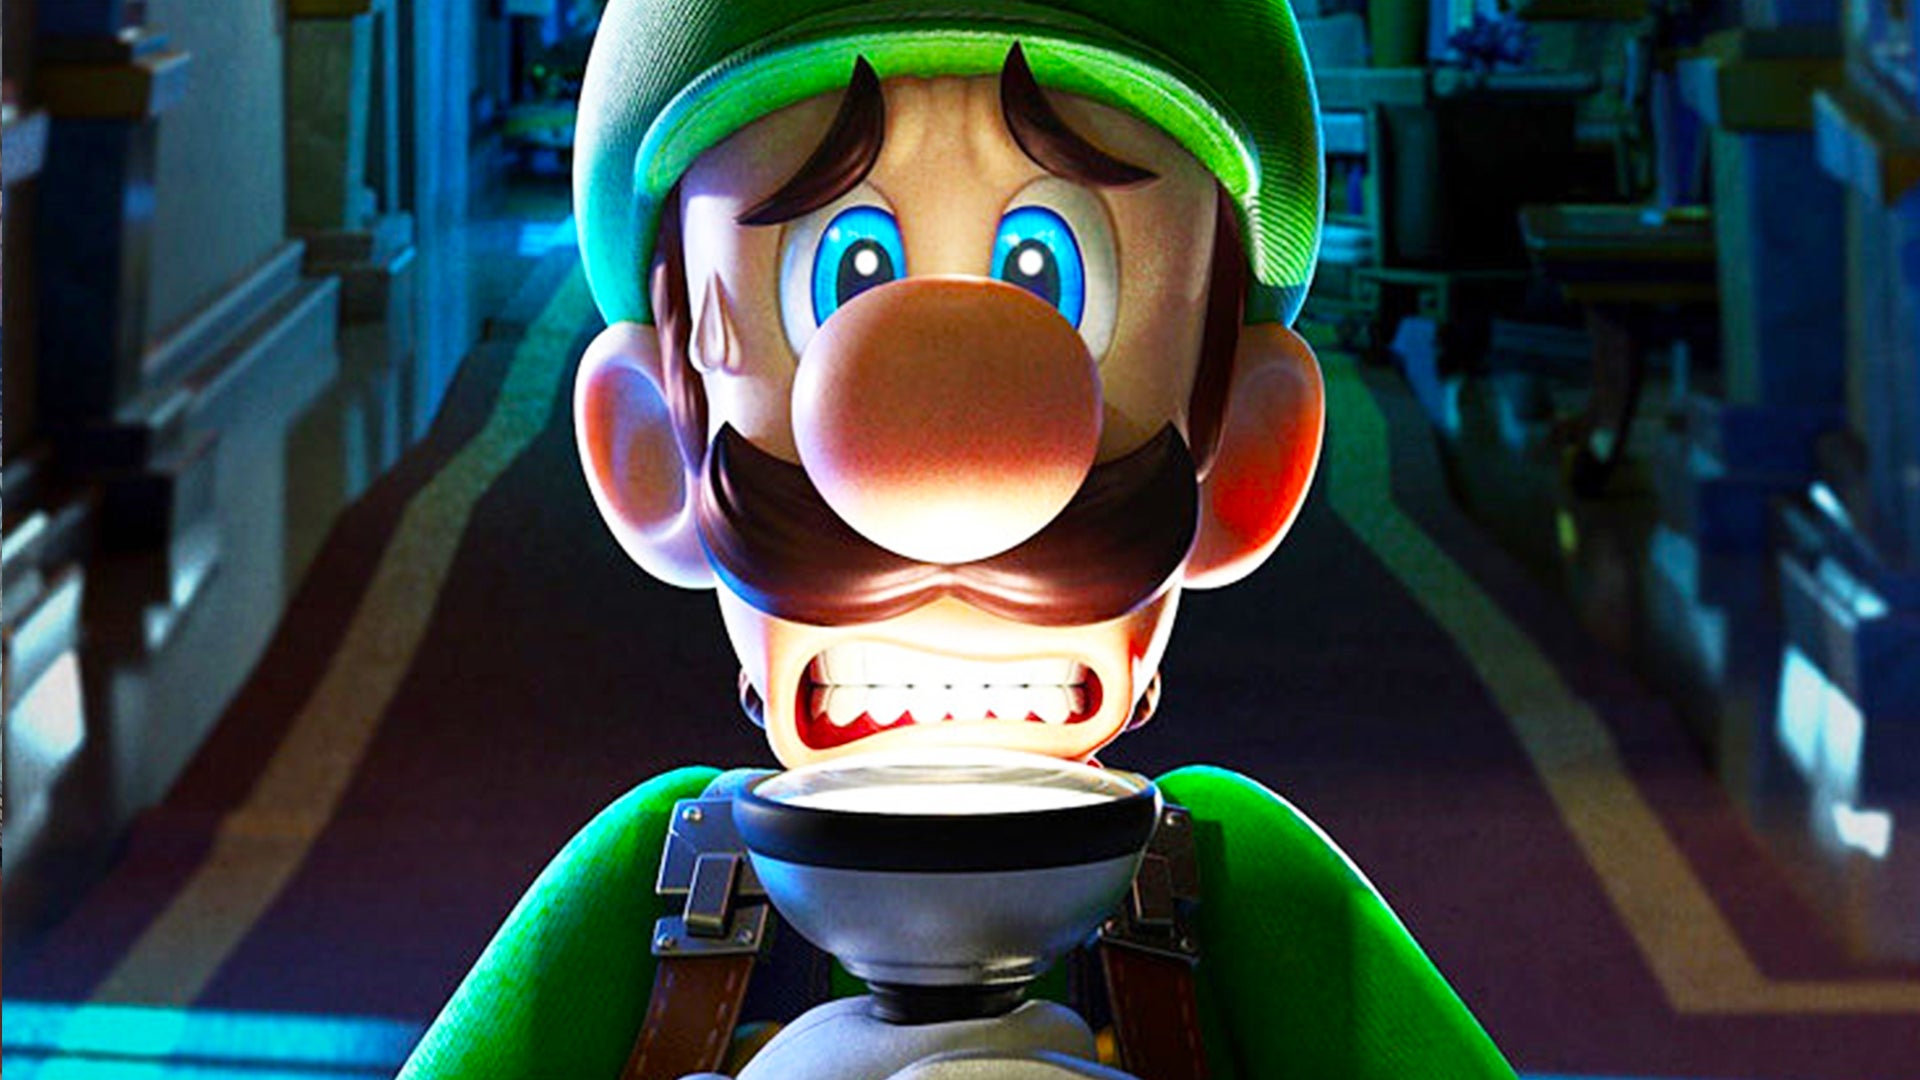 Image for Luigi's Mansion 3: Switch Tech Breakdown - A Playable CG Movie on Switch?